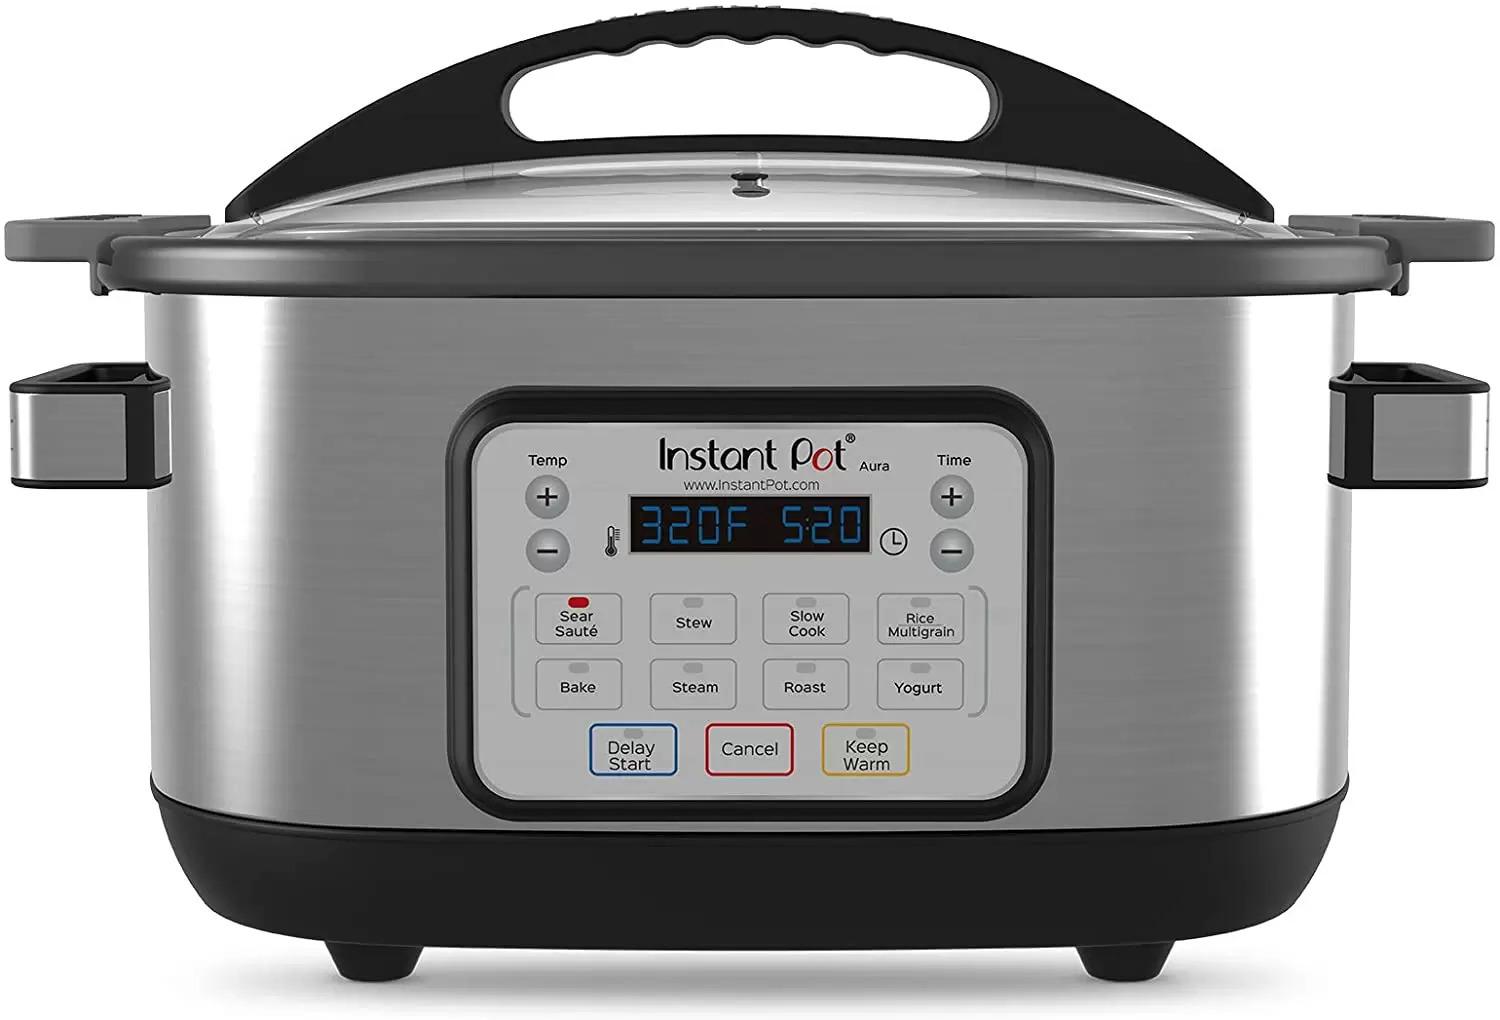 Instant Pot Aura 10-in-1 Multicooker Slow Cooker for $69.95 Shipped